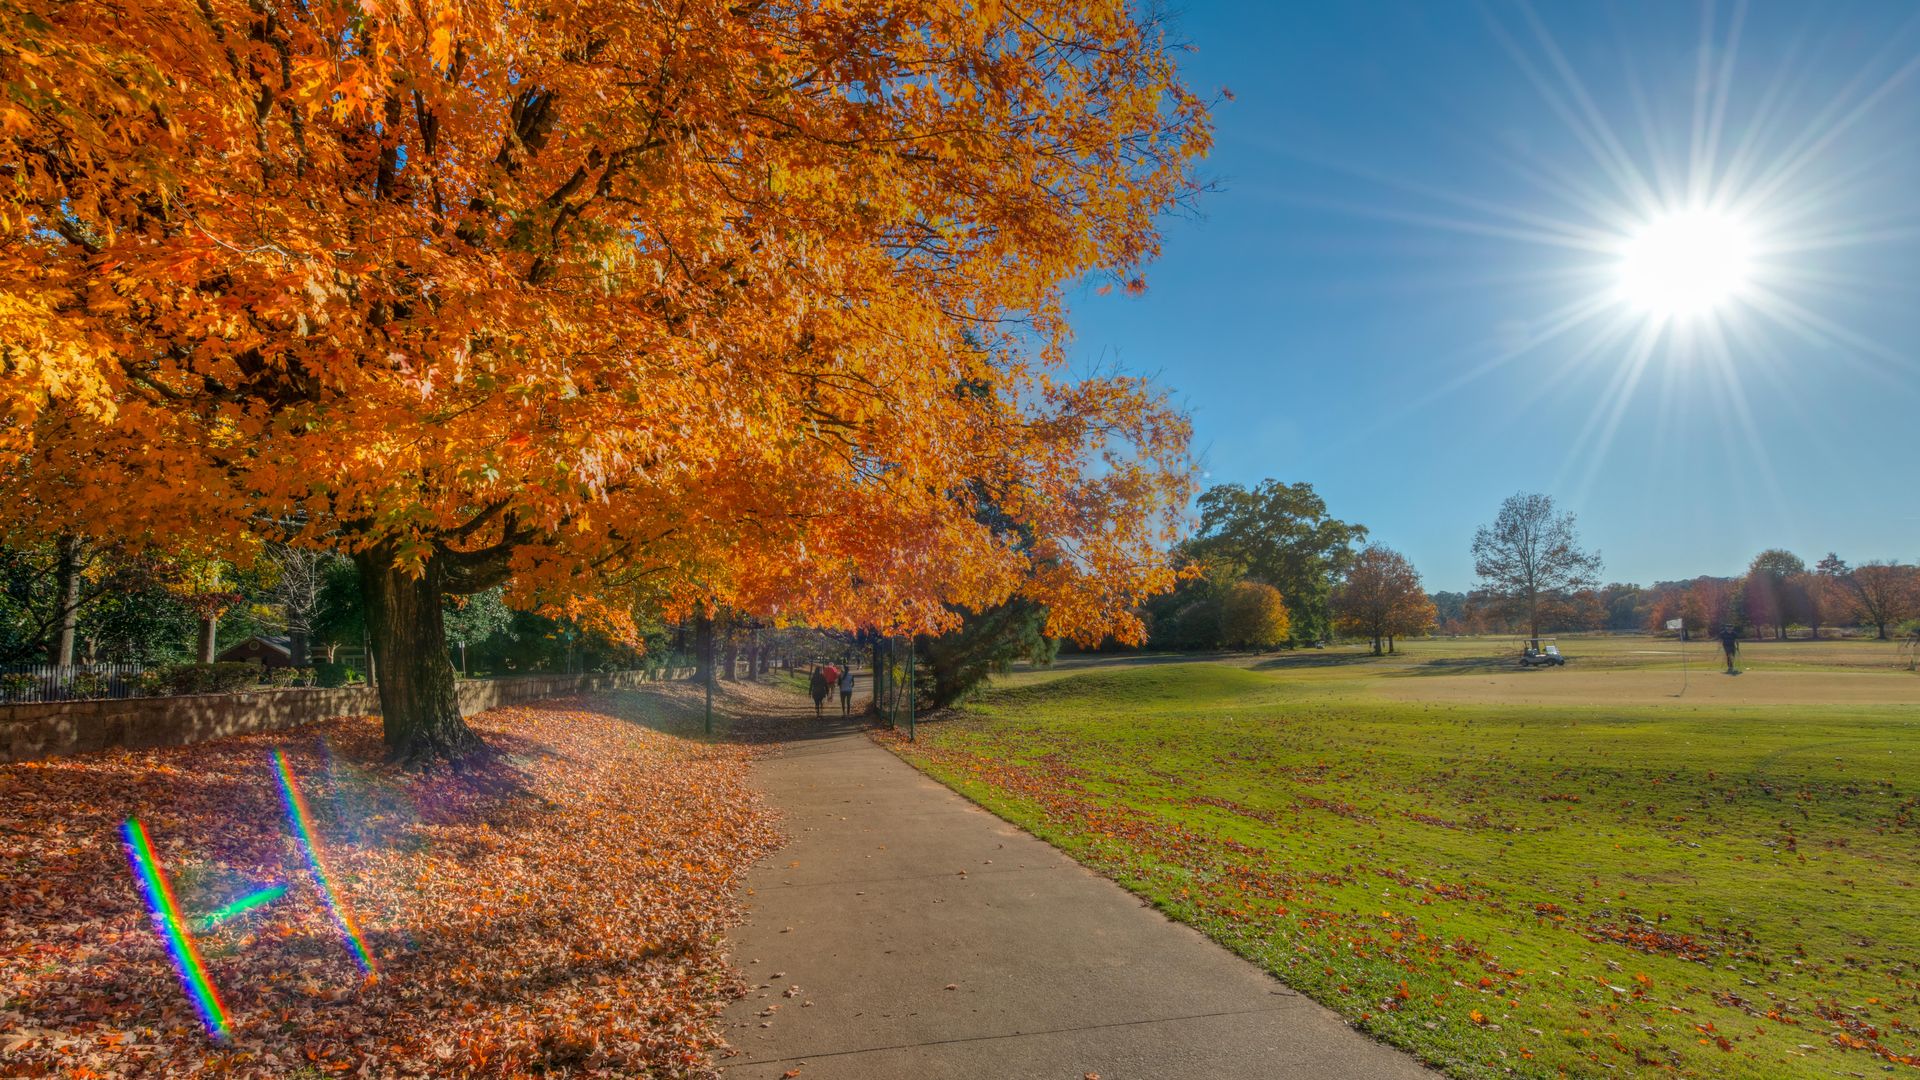 People walking on a pave path in autumn as the leaves turn yellow and orange